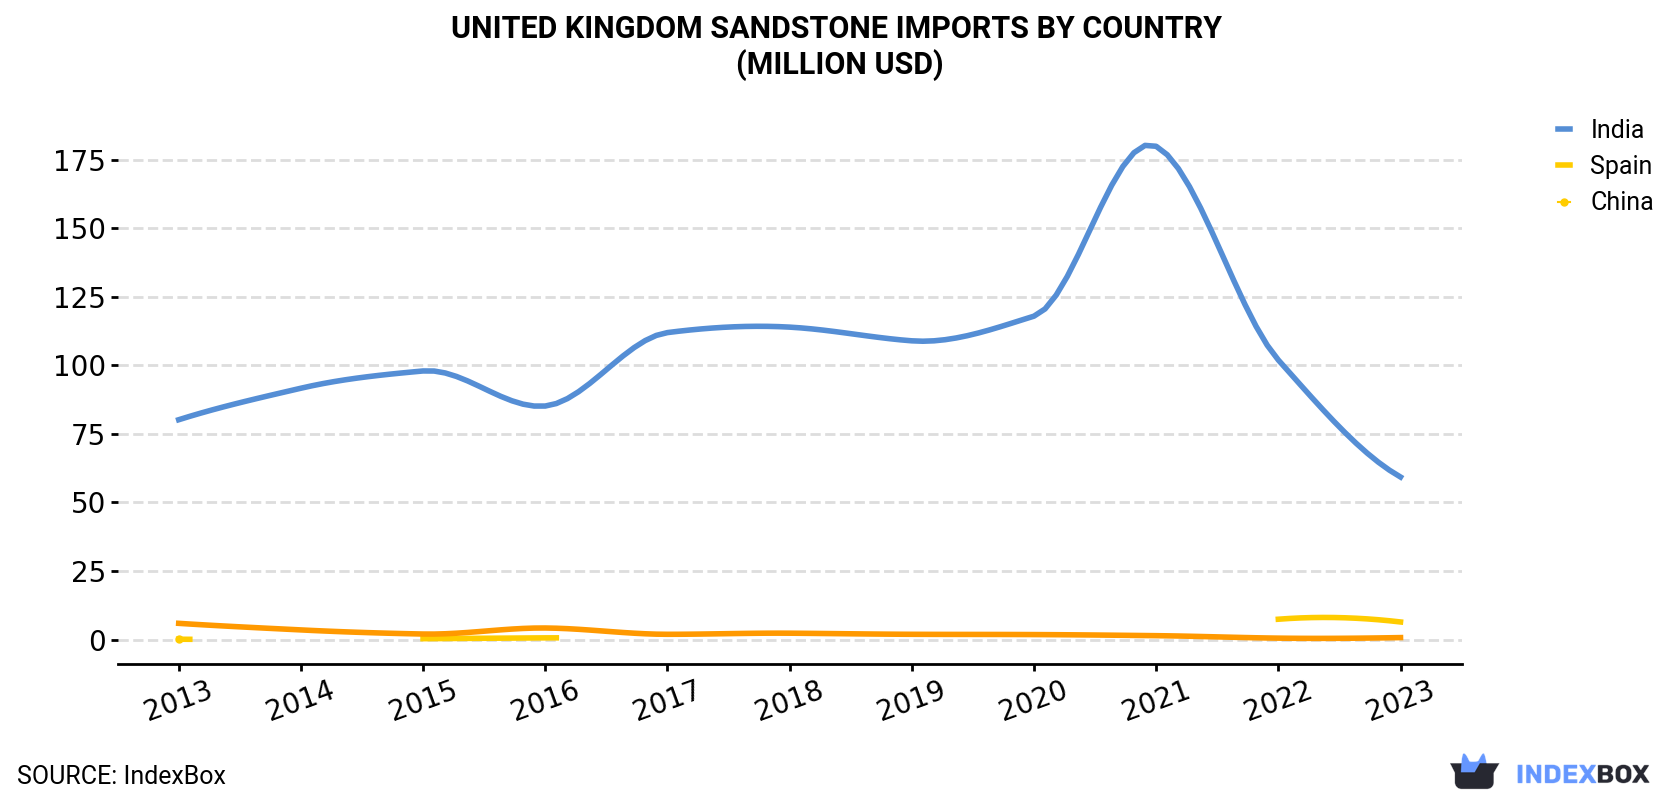 United Kingdom Sandstone Imports By Country (Million USD)